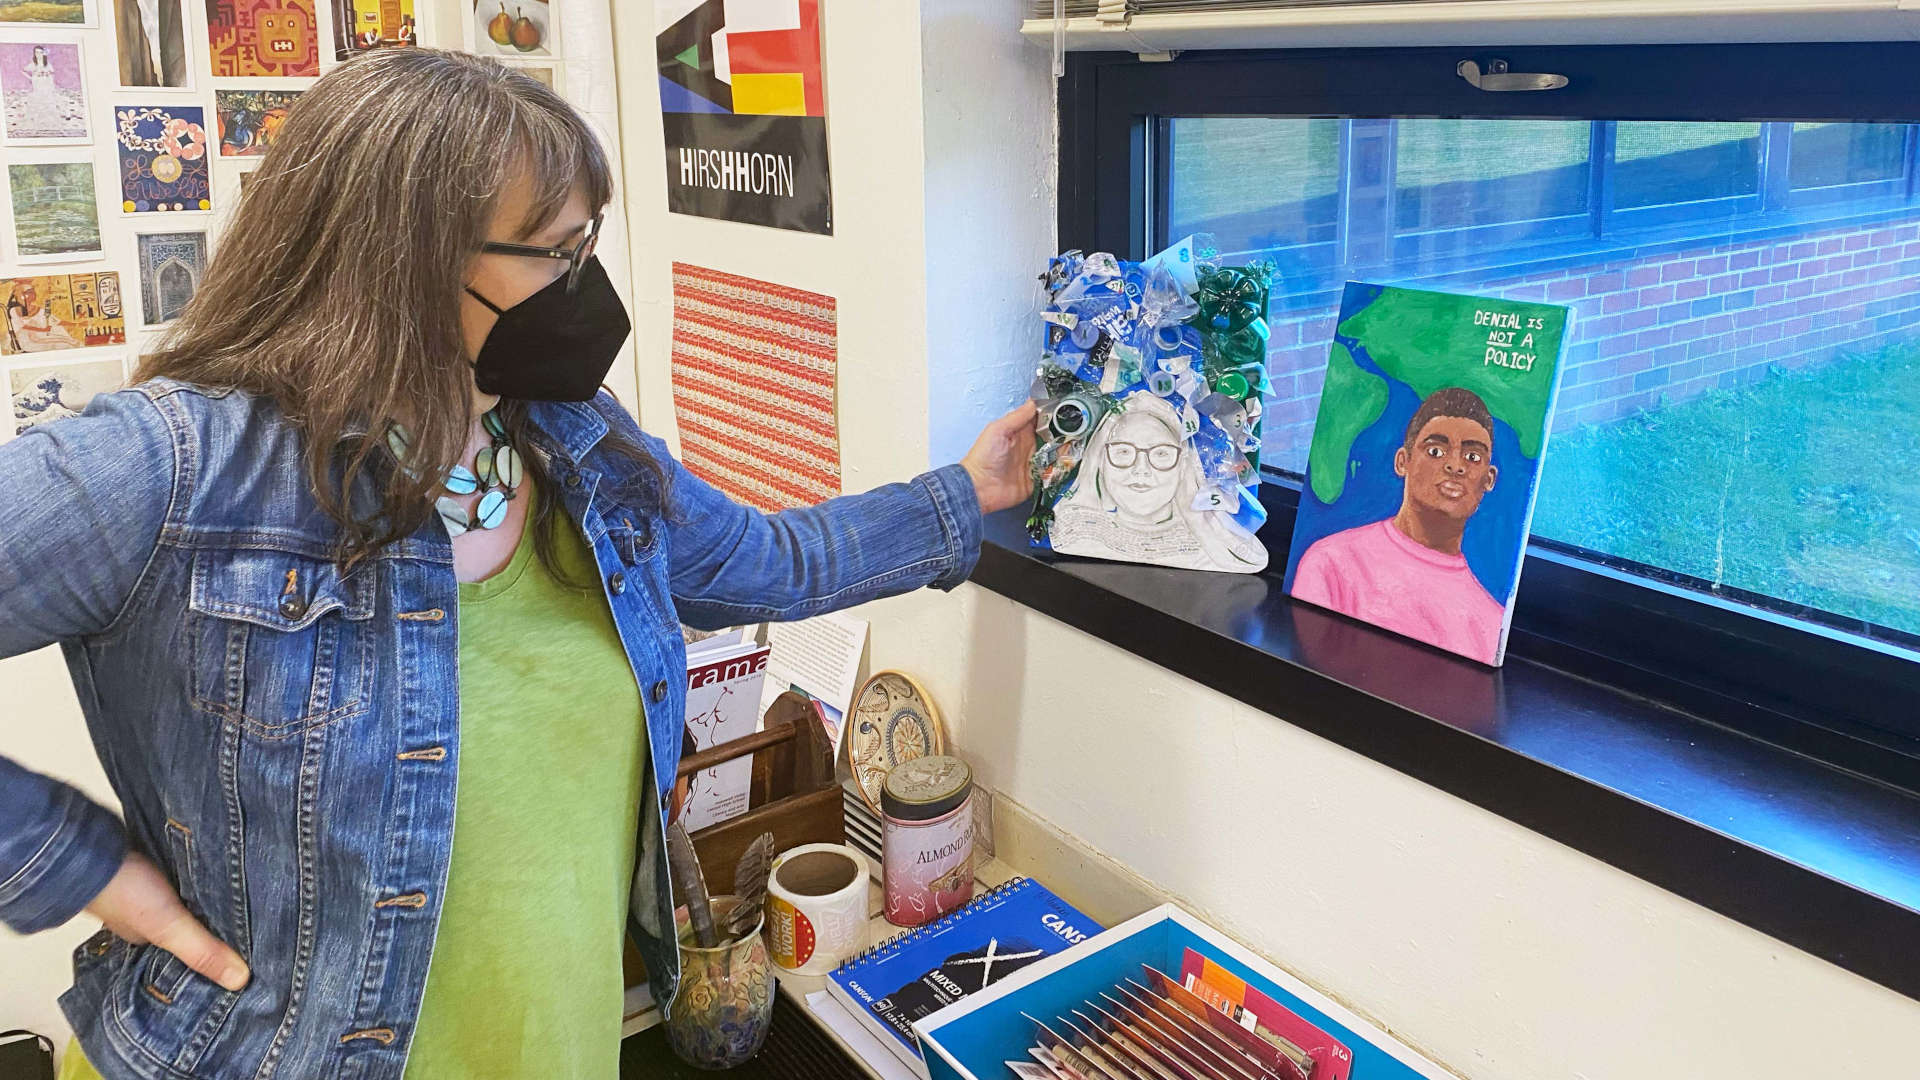 Carolyn McGrath, an art teacher at Central Valley High School, in
Pennington, New Jersey, shows off portraits of climate activists painted by her students.